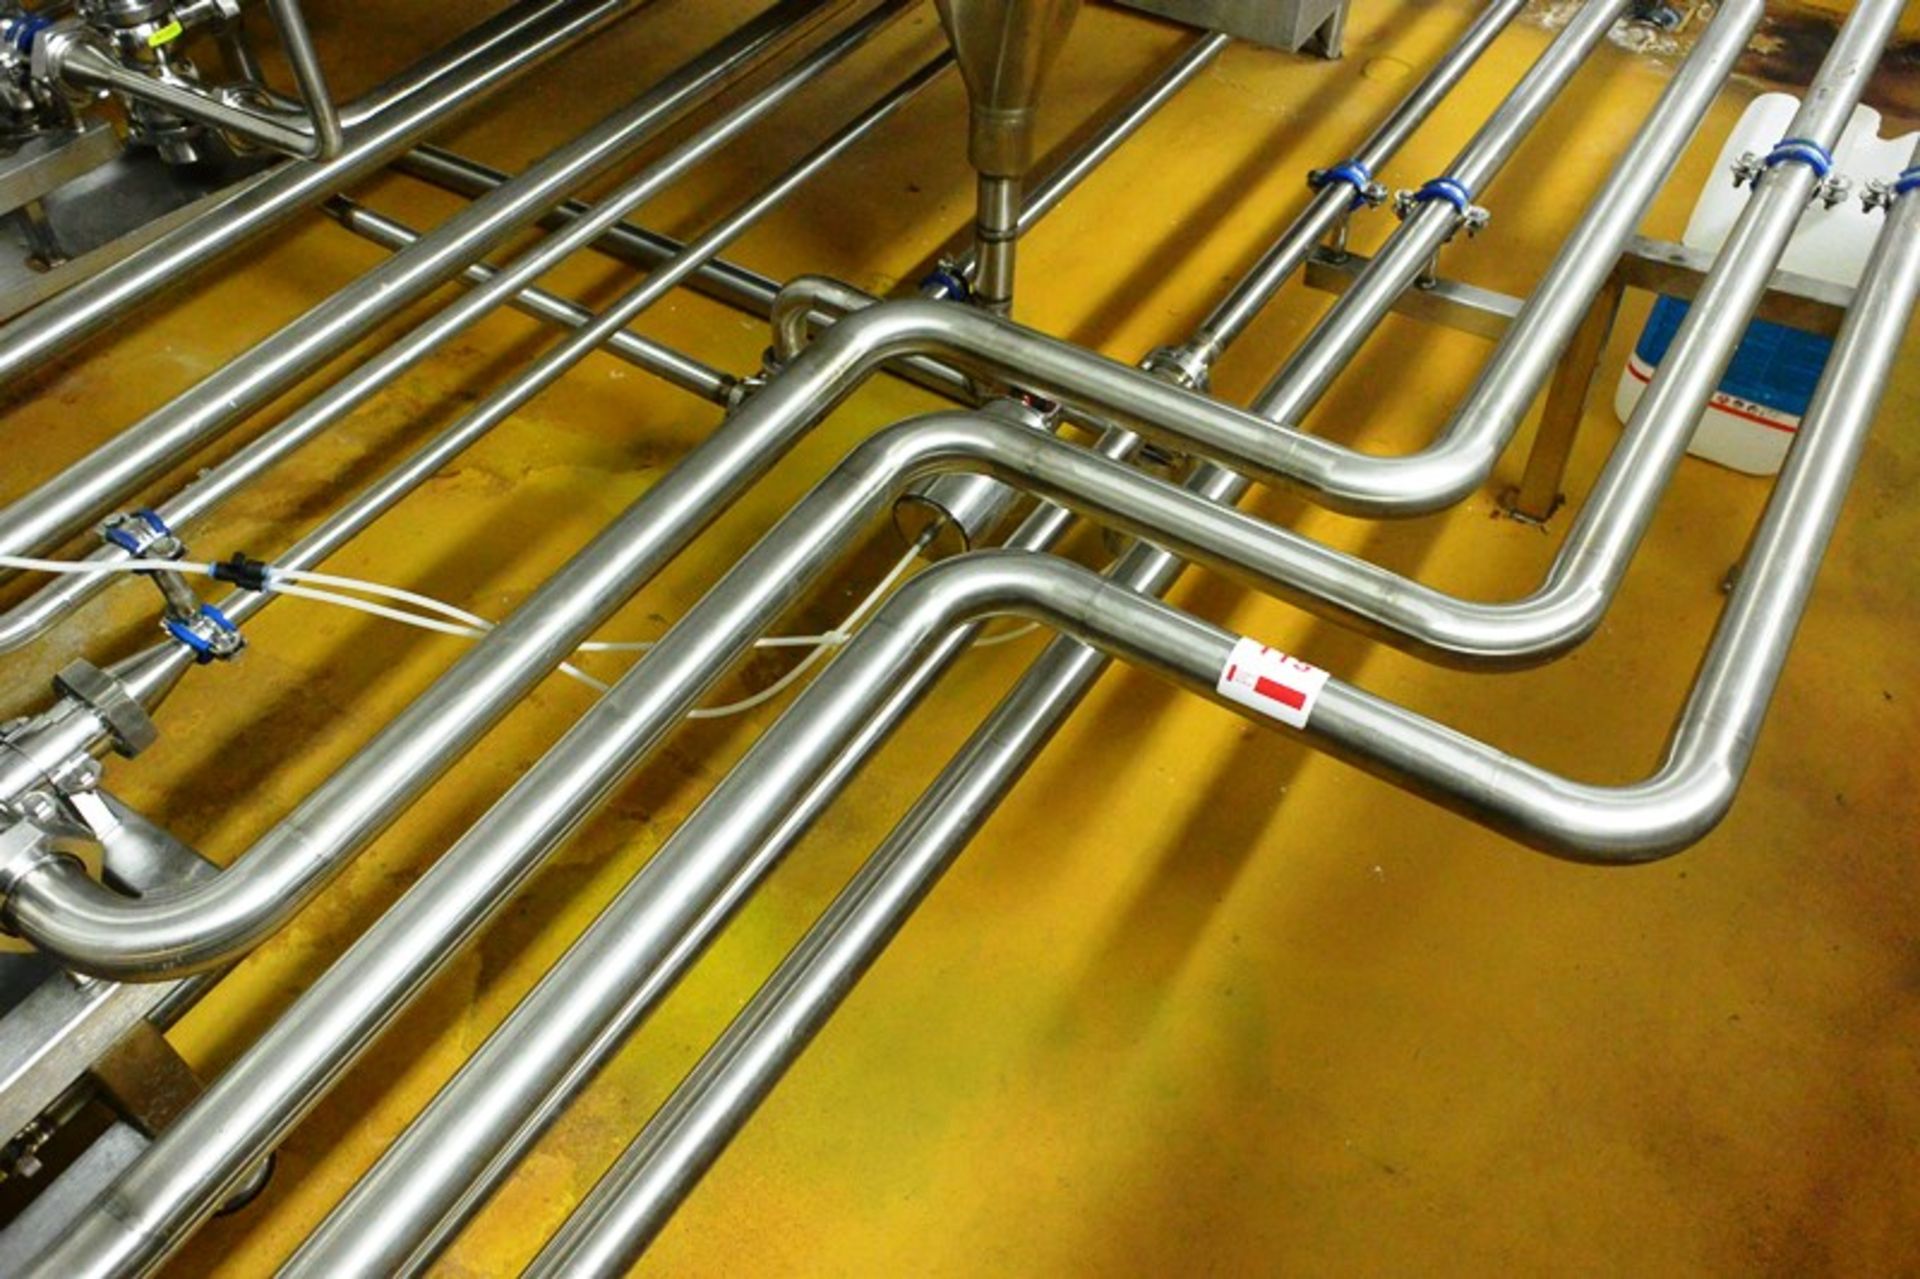 Allowance for quantity of various gauge stainless steel pipework, approx 20m total length